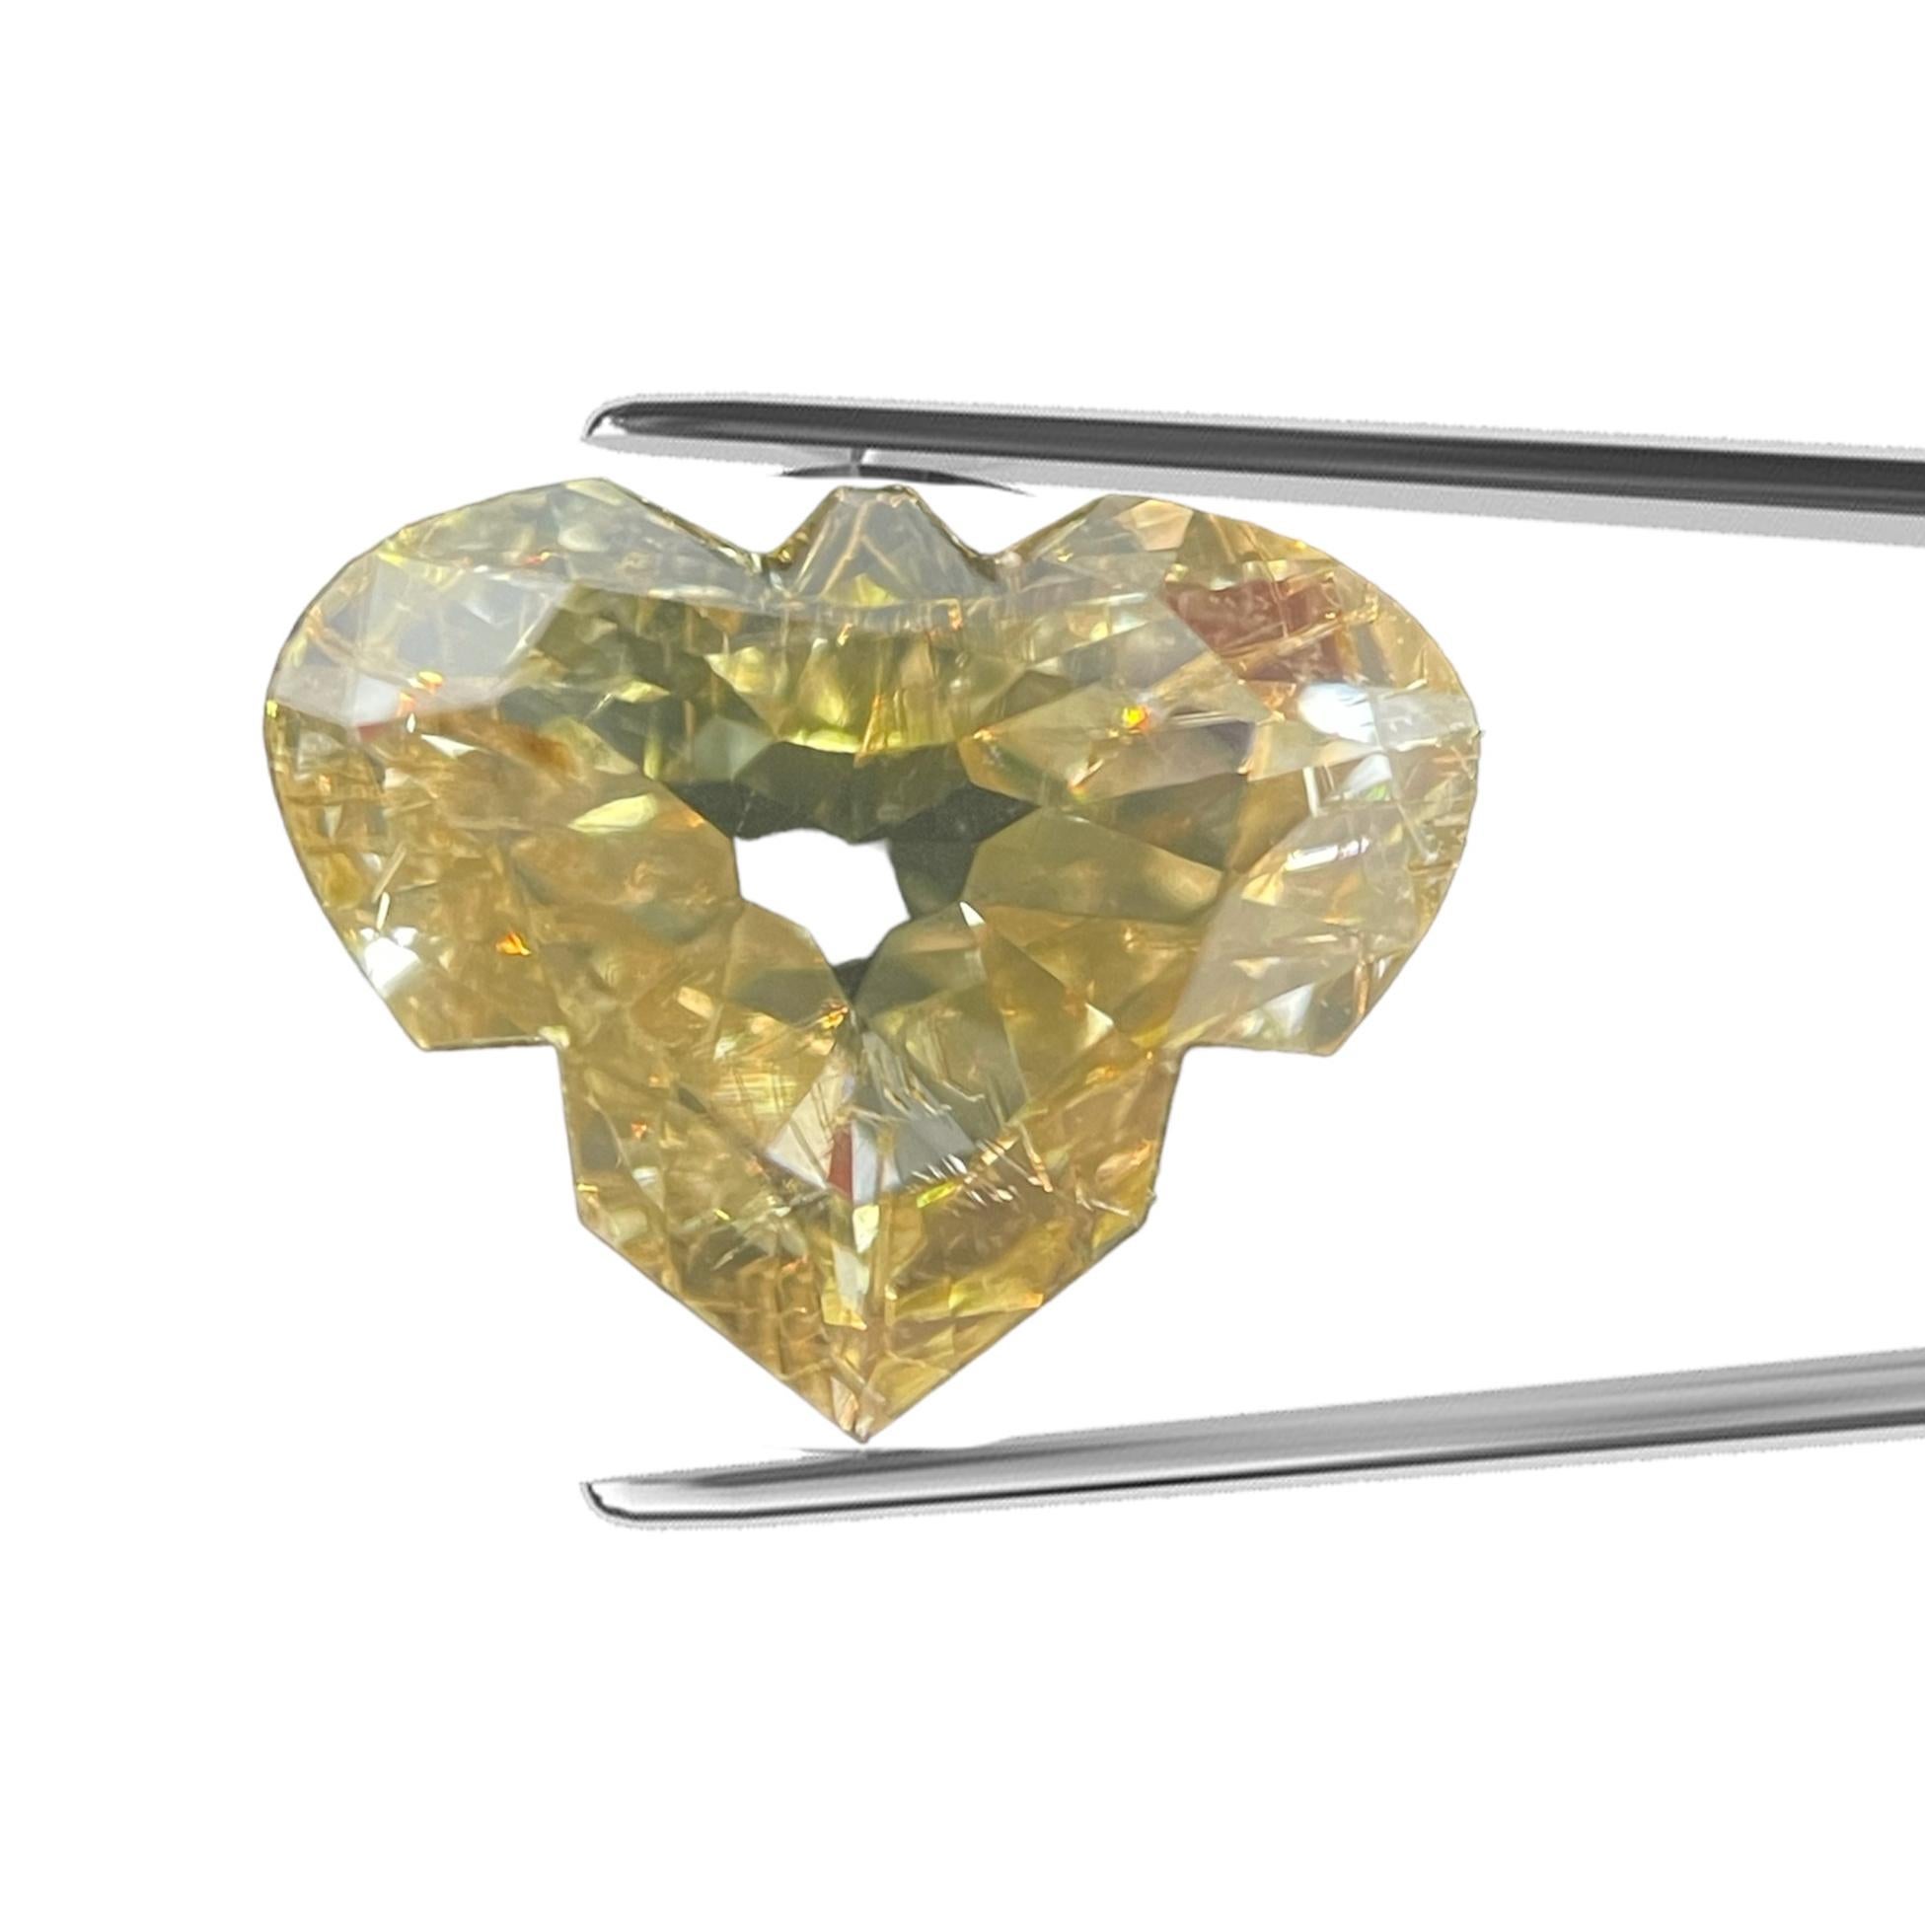 ITEM DESCRIPTION
ID #:	NYC56122
Stone Shape:	BIRD MODIFIED BRILLIANT 
Diamond Weight:	0.93ct
Clarity:	I1
Color:	Fancy BROWNISH Yellow
Cut:	Excellent
Measurements:	6.63 x 8.38 x 2.66 mm
Depth %:	31.8%
Table